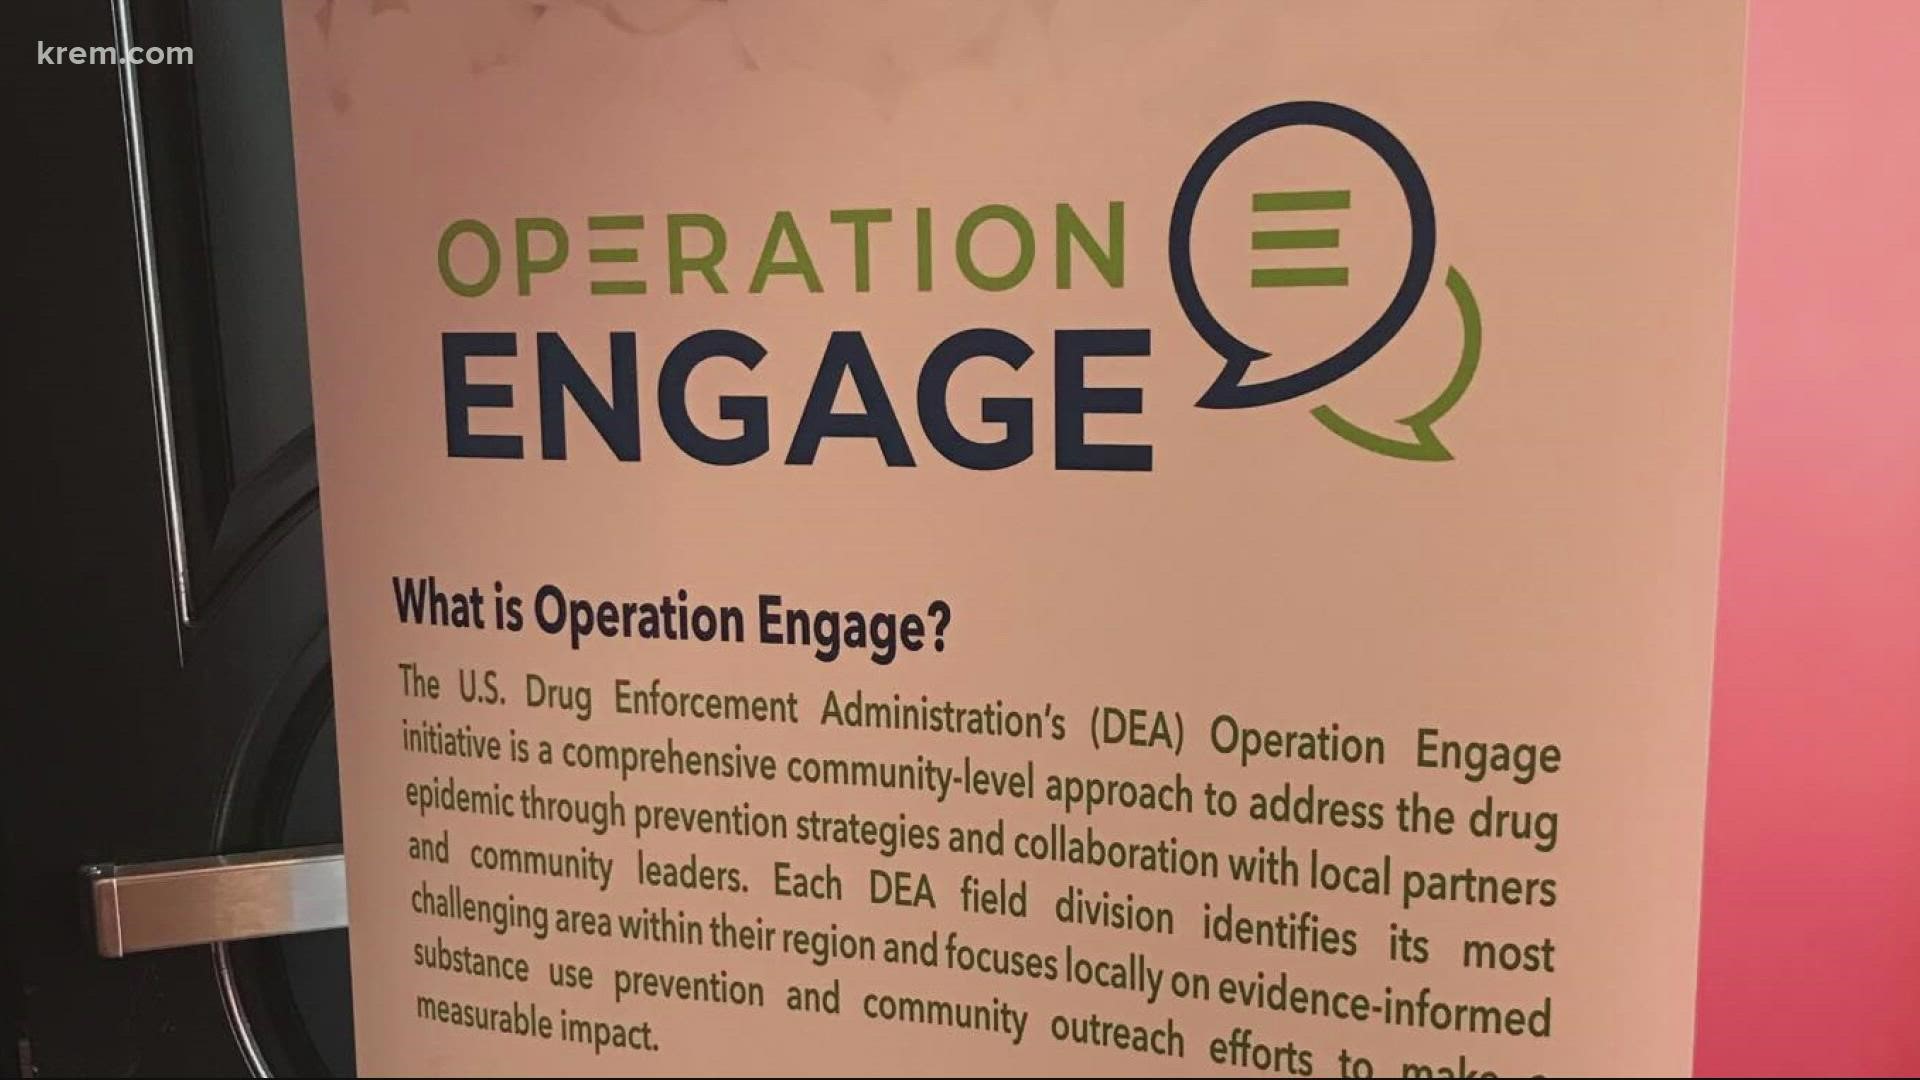 Spokane was chosen to house Operation Engage due to the staggering number of fentanyl overdoses and arrests in the area.